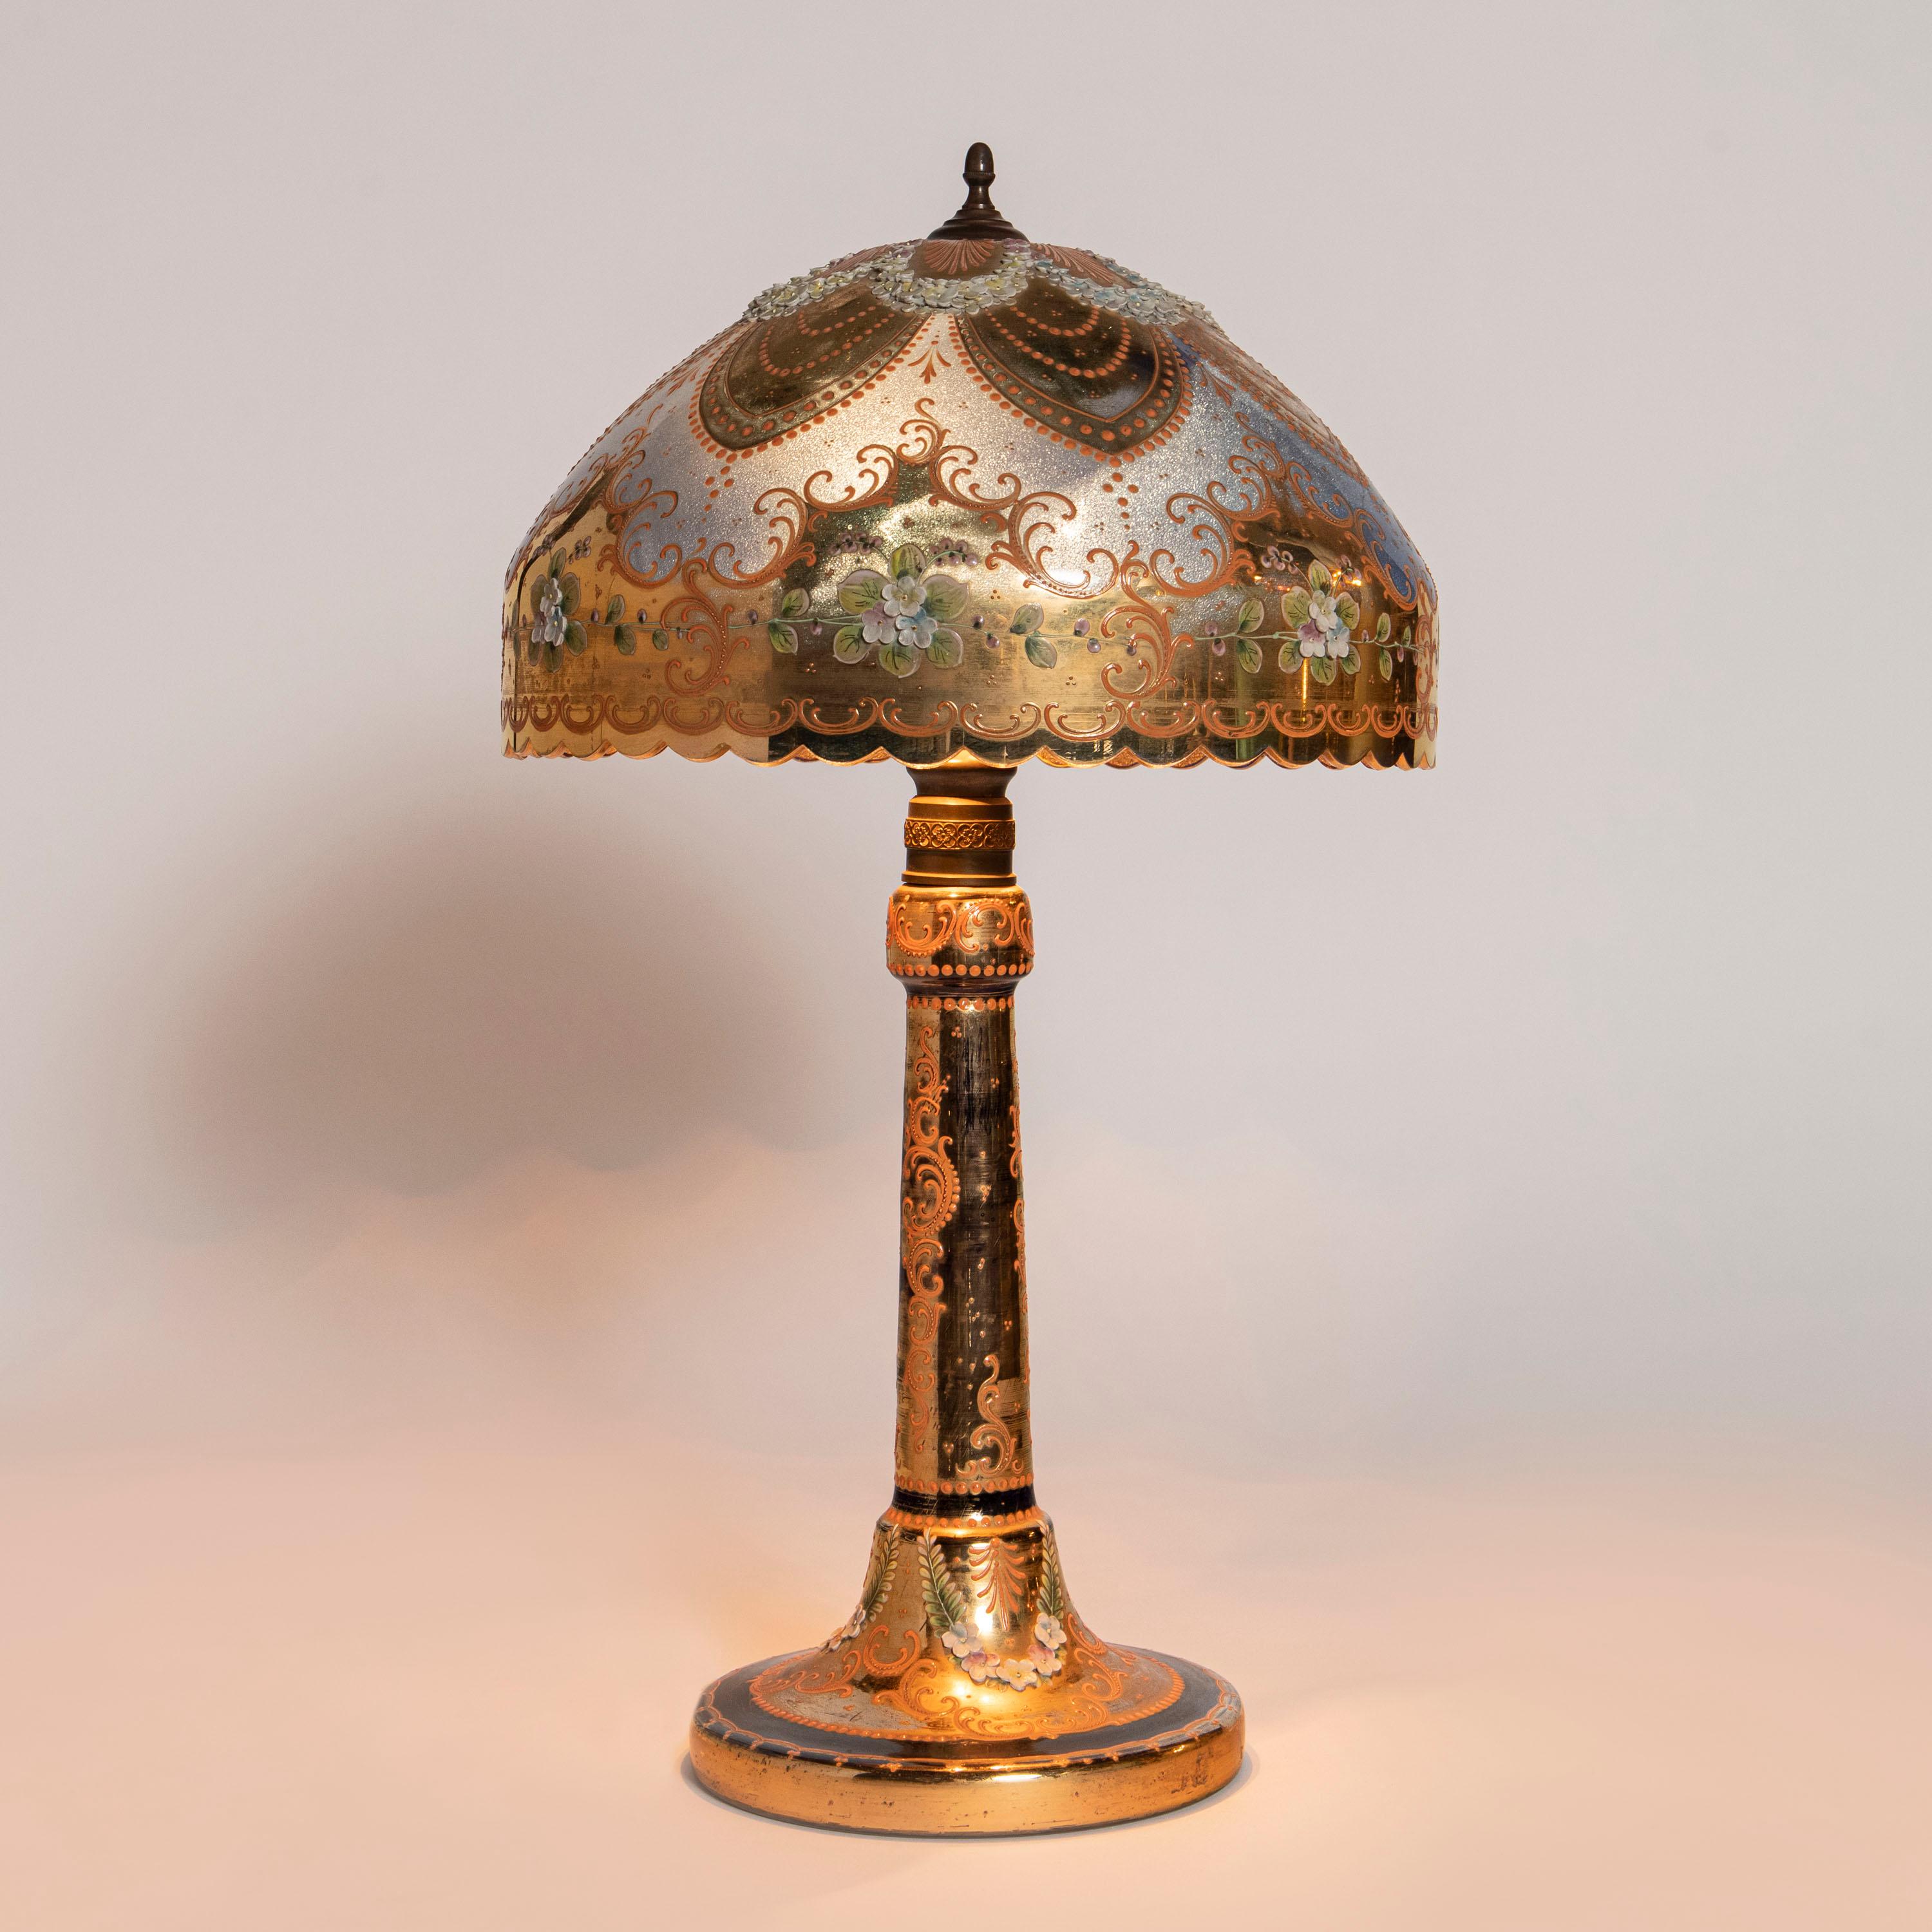 Murano glass, gold and enamel table lamp, Italy, Early 20th century.